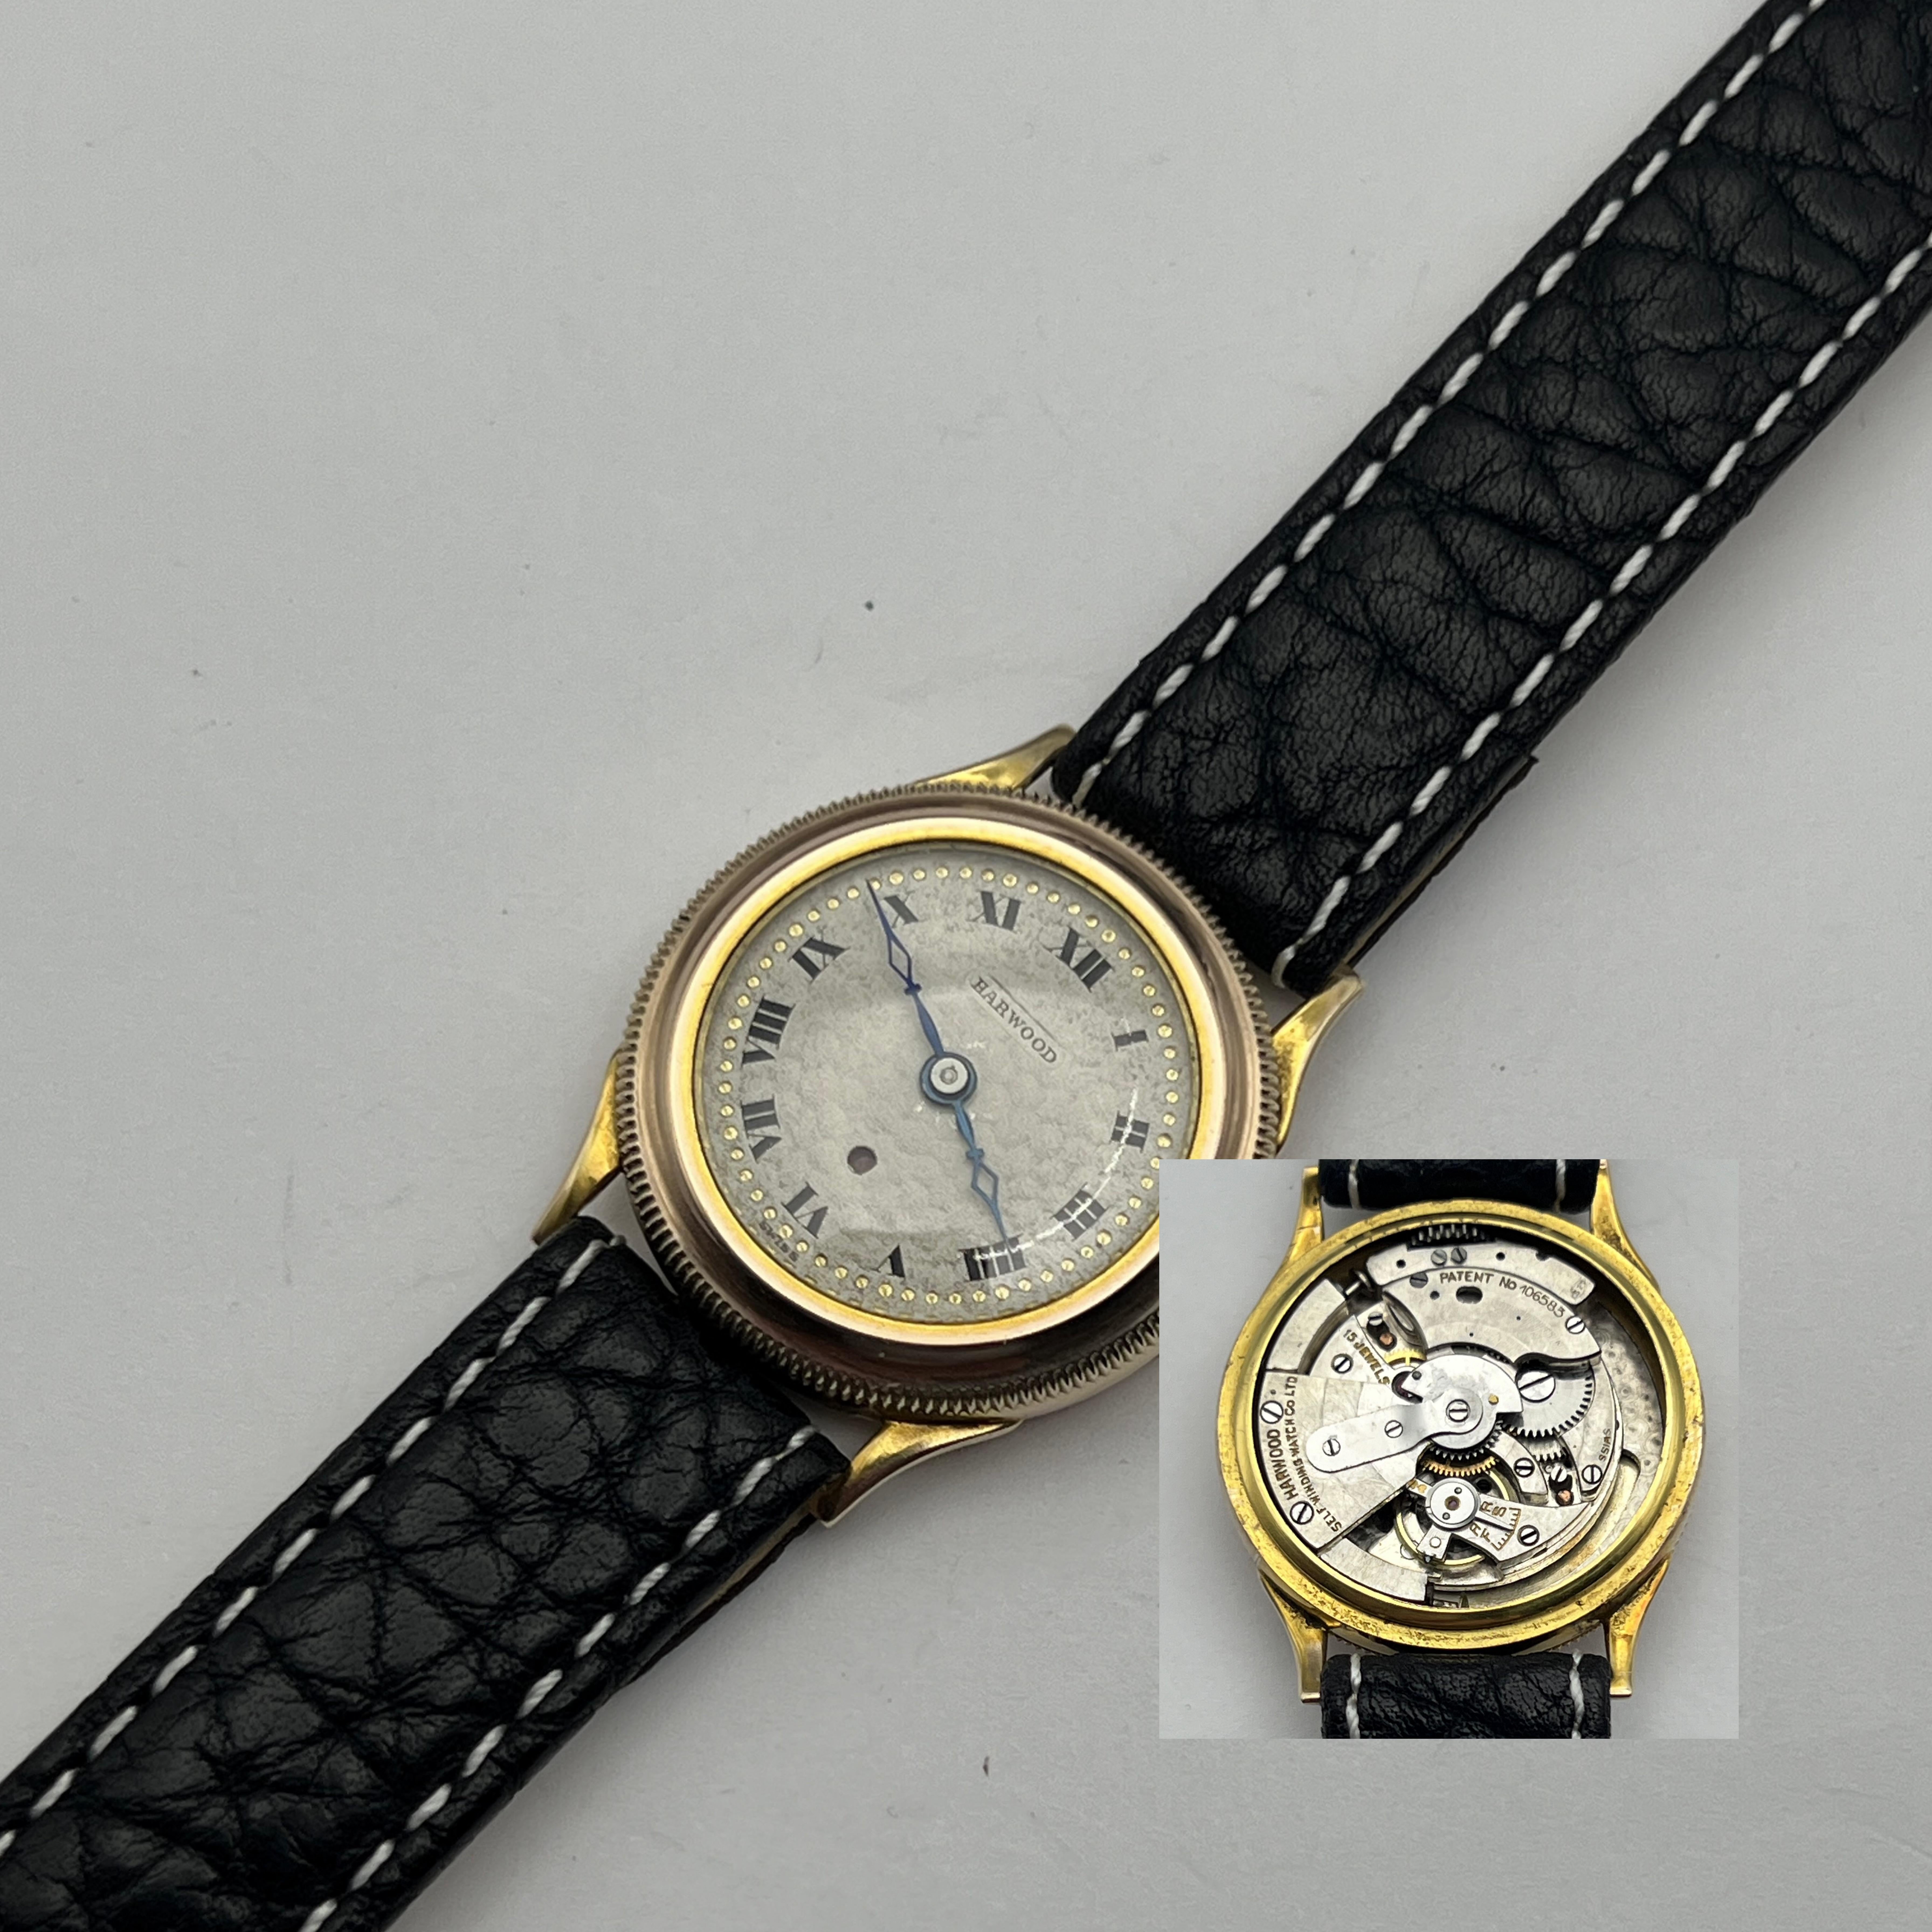 1920’s Solid Yellow Gold Harwood Bumper Automatic For Sale 5